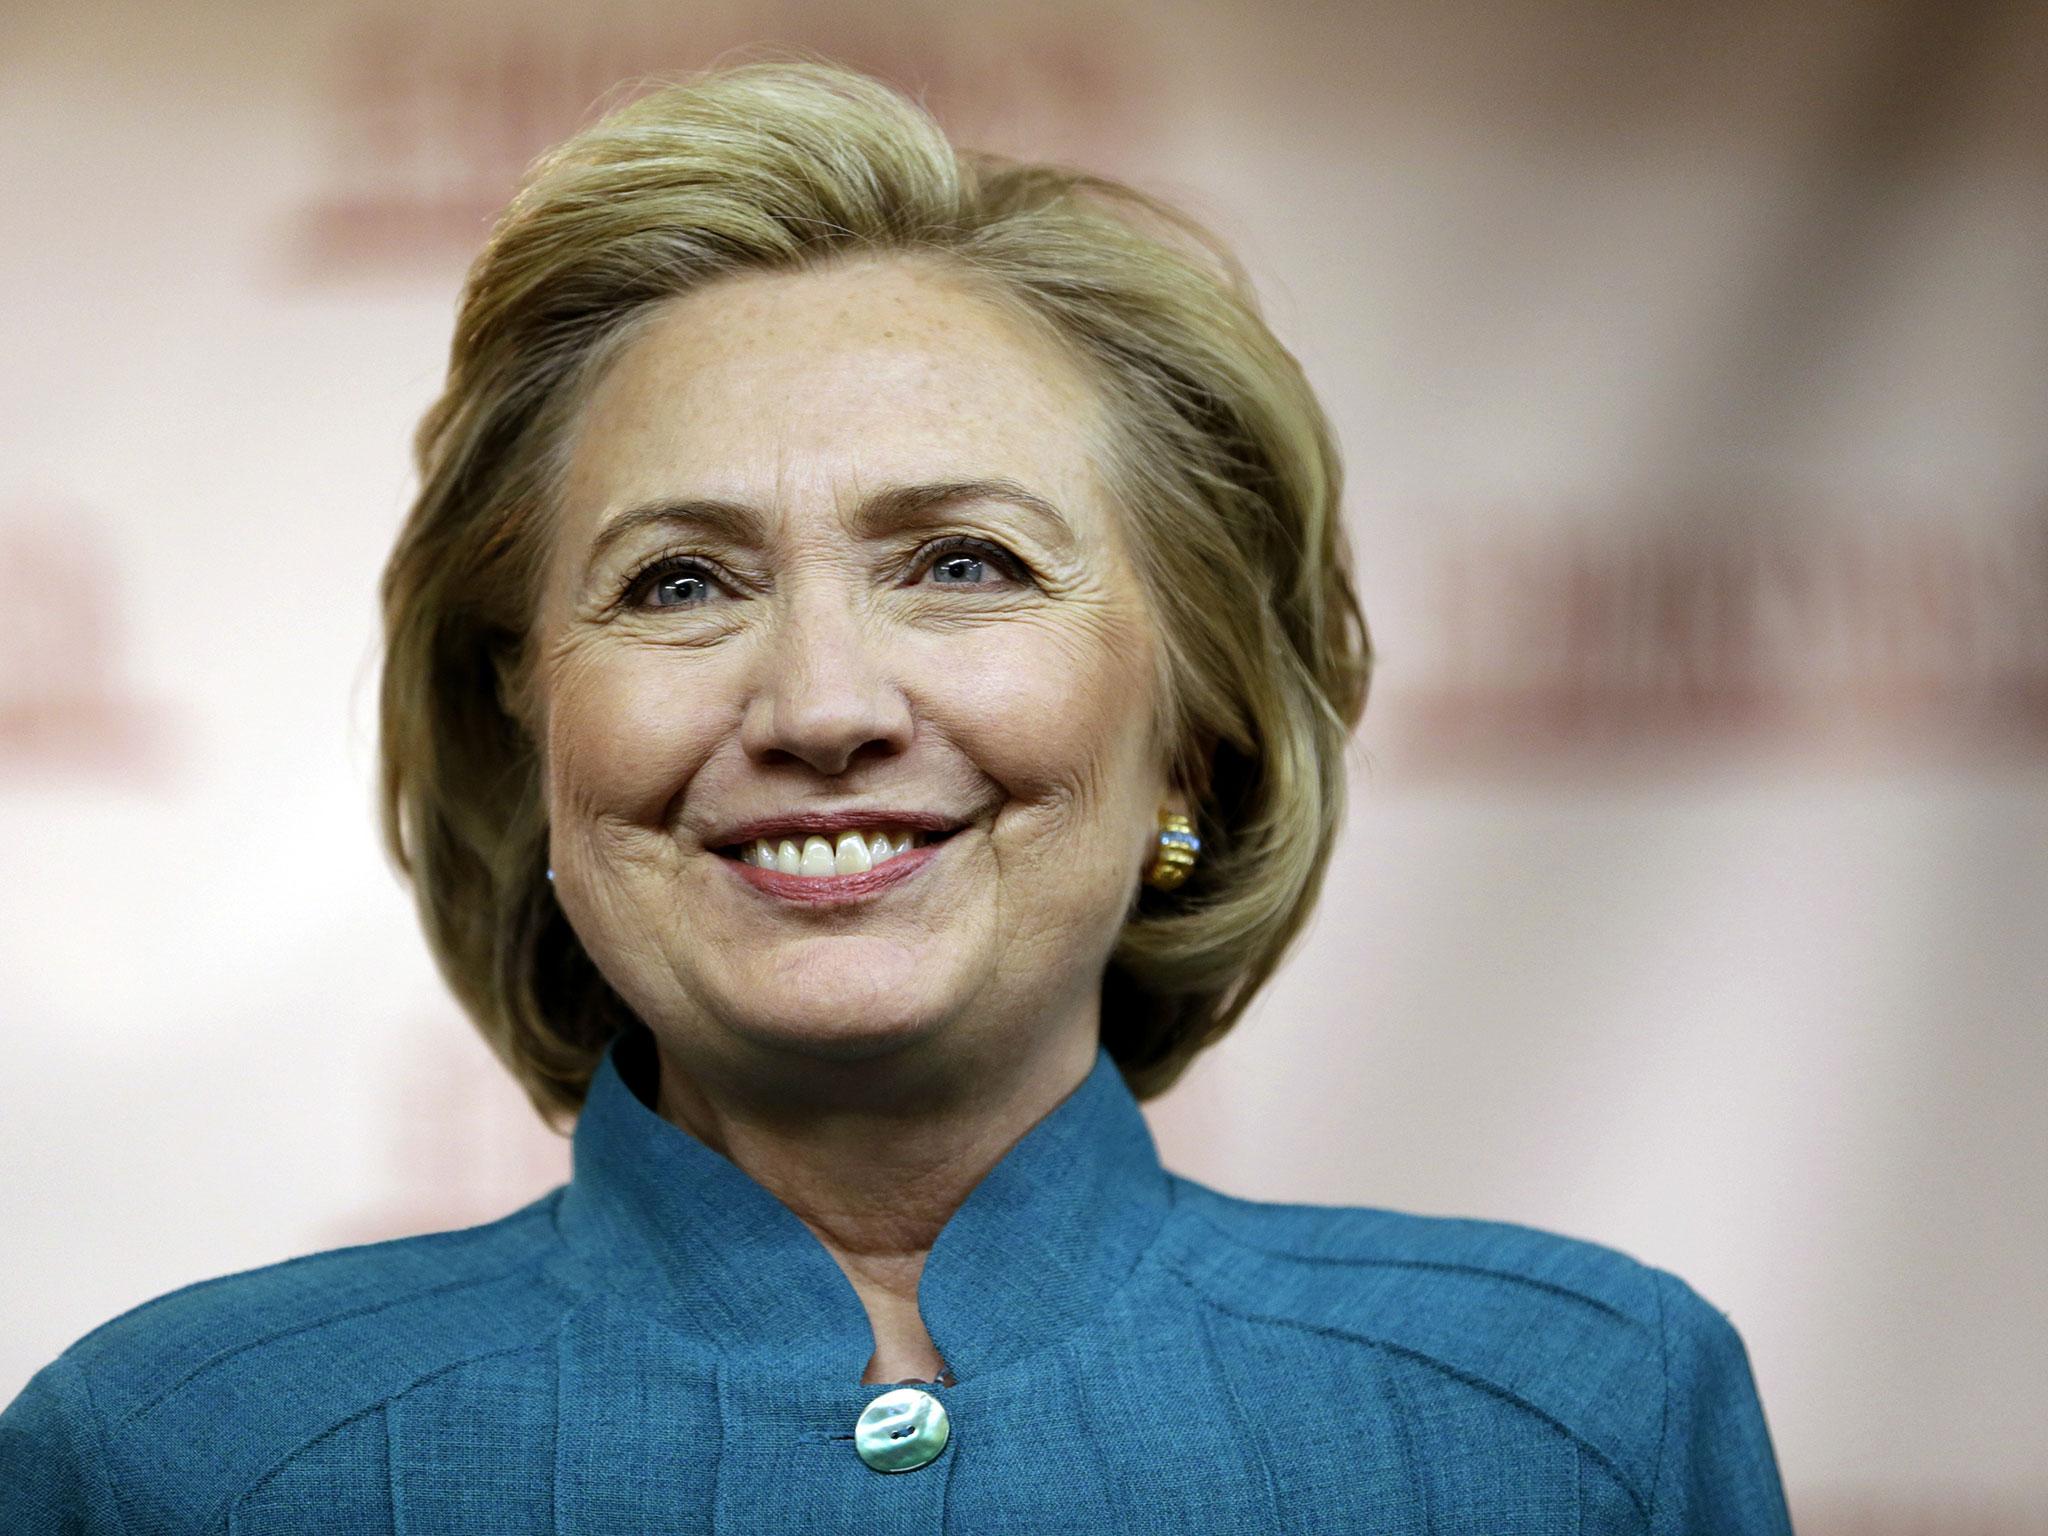 Hillary Clinton said the role of president had become even more difficult in the 21st century